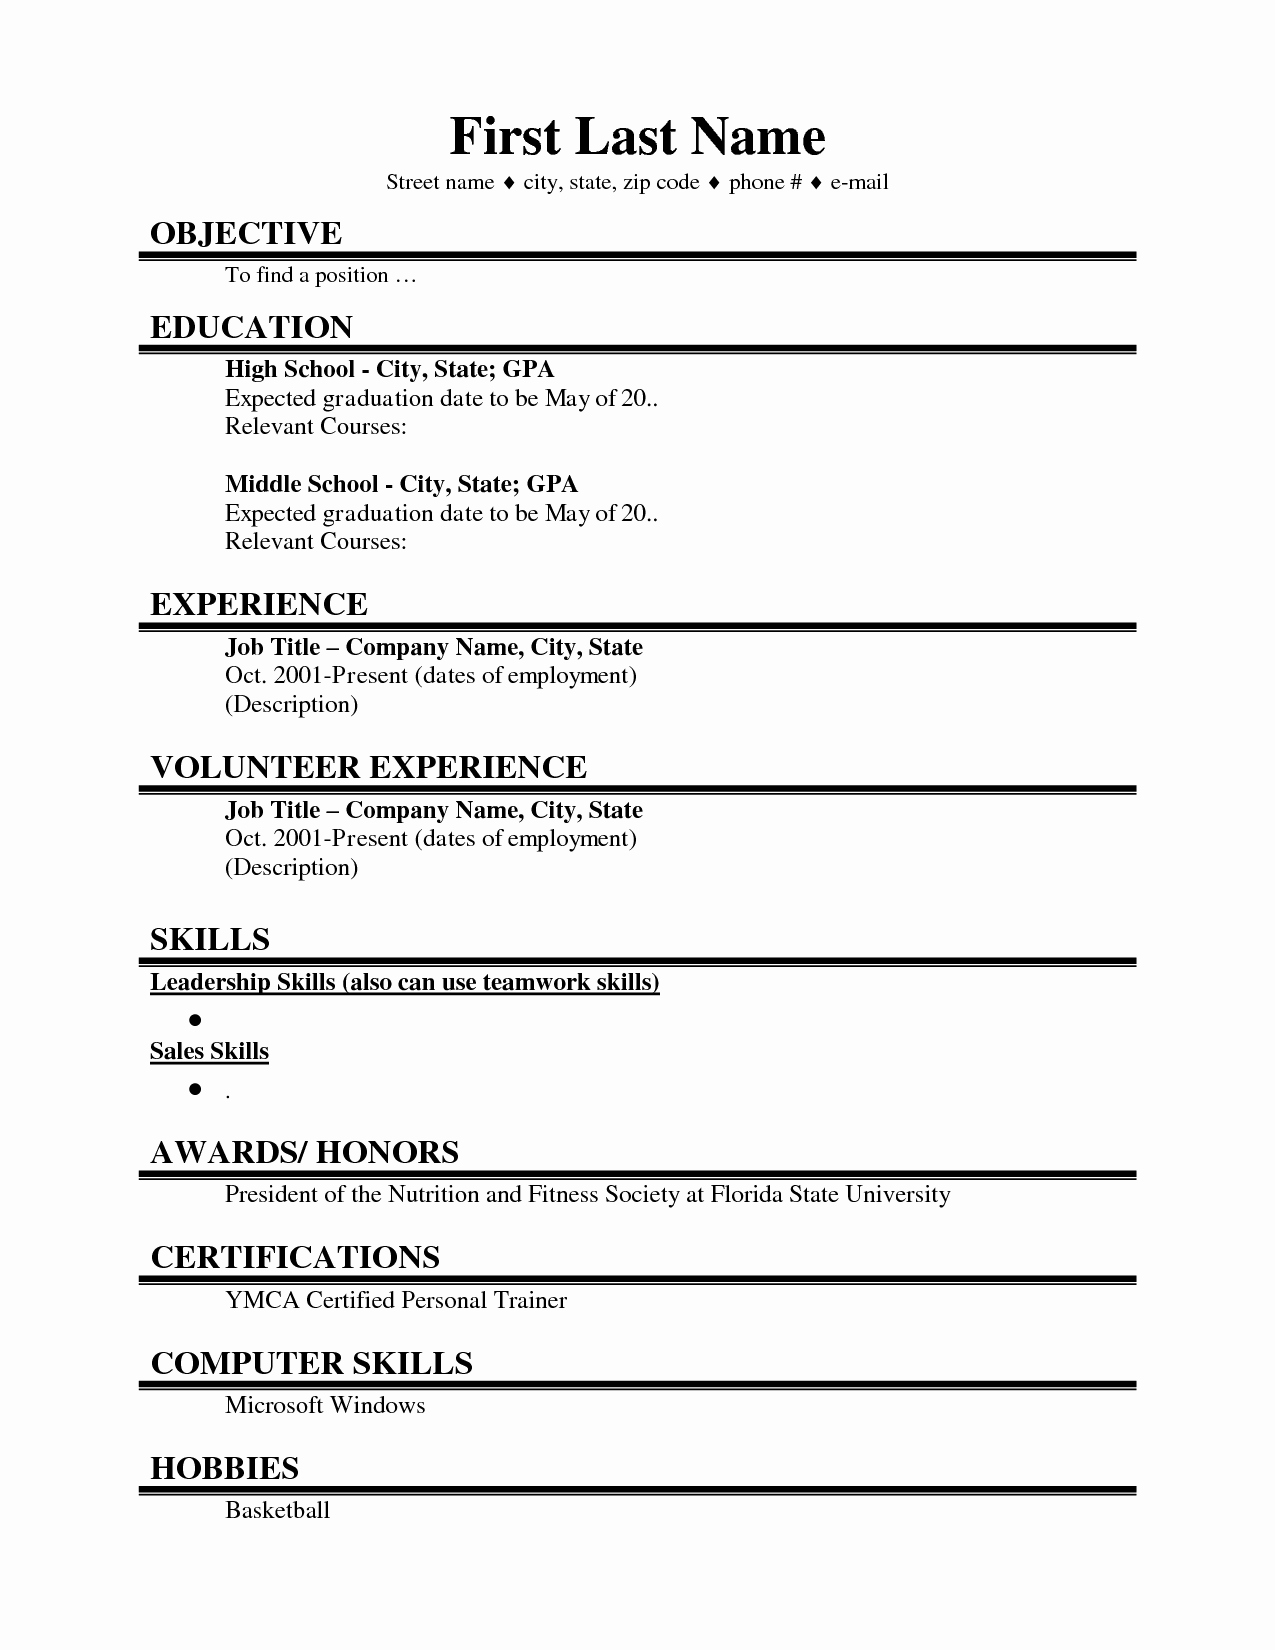 Simple Resume Template for Students Fresh First Job Resume Google Search Resume